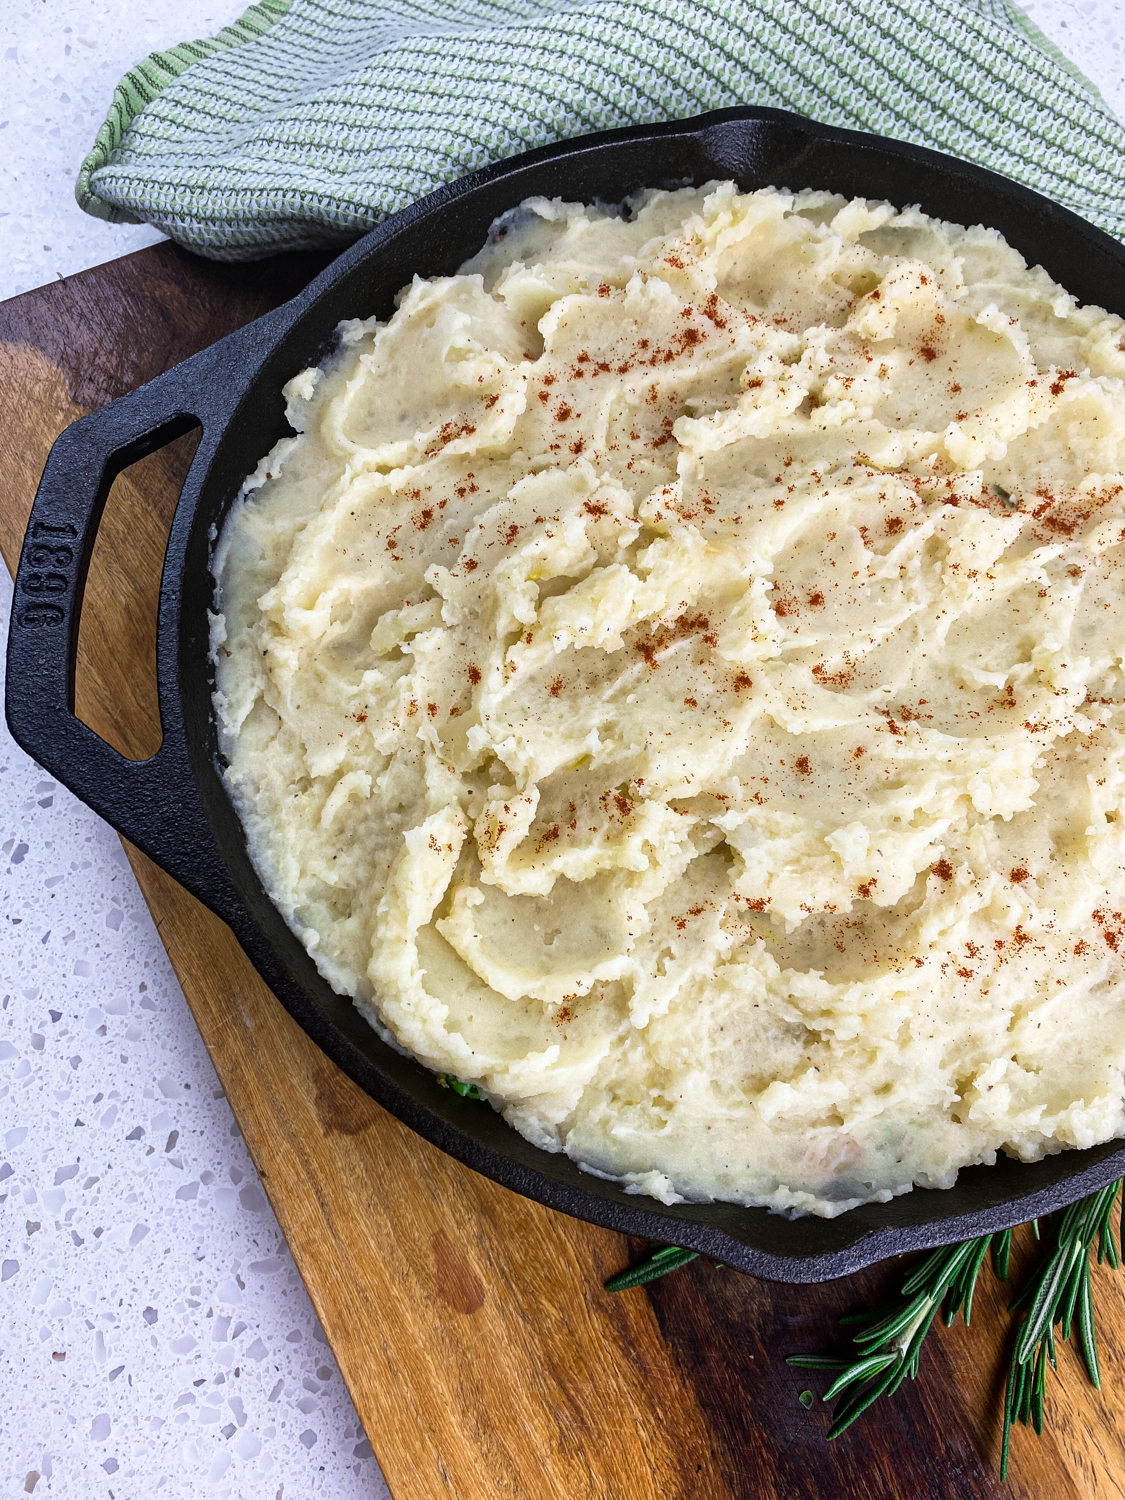 Everything in the skillet topped with fluffy mashed potatoes.